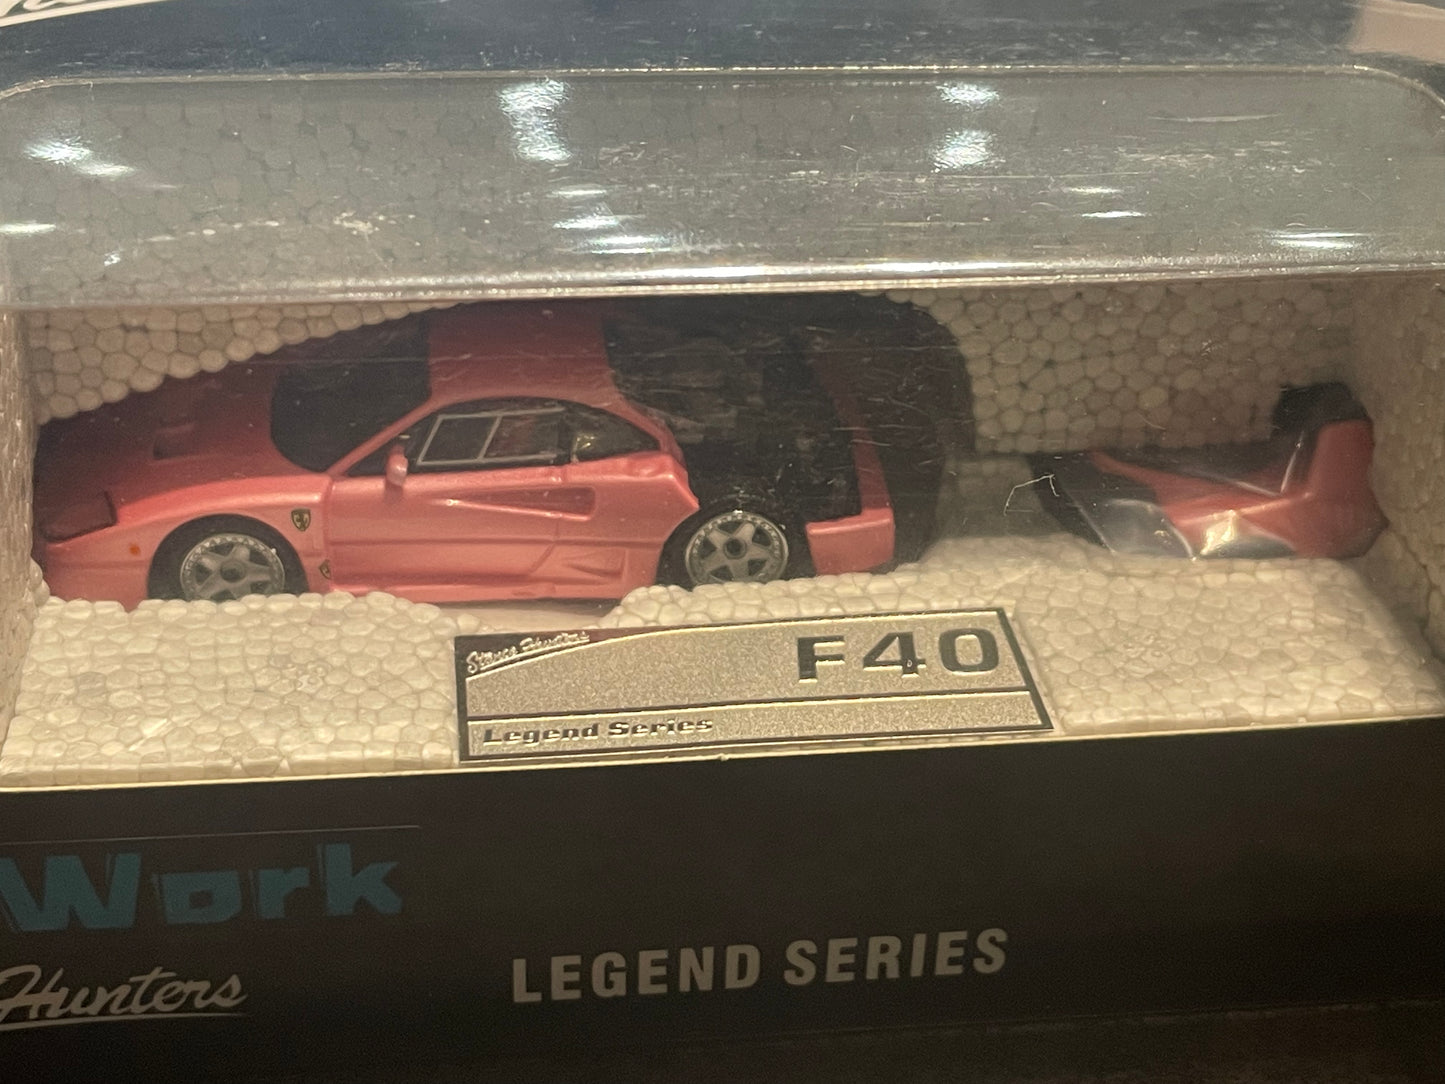 Stance Hunters SH 1/64 Classic supercar series F40 LM diecast Model - Pink